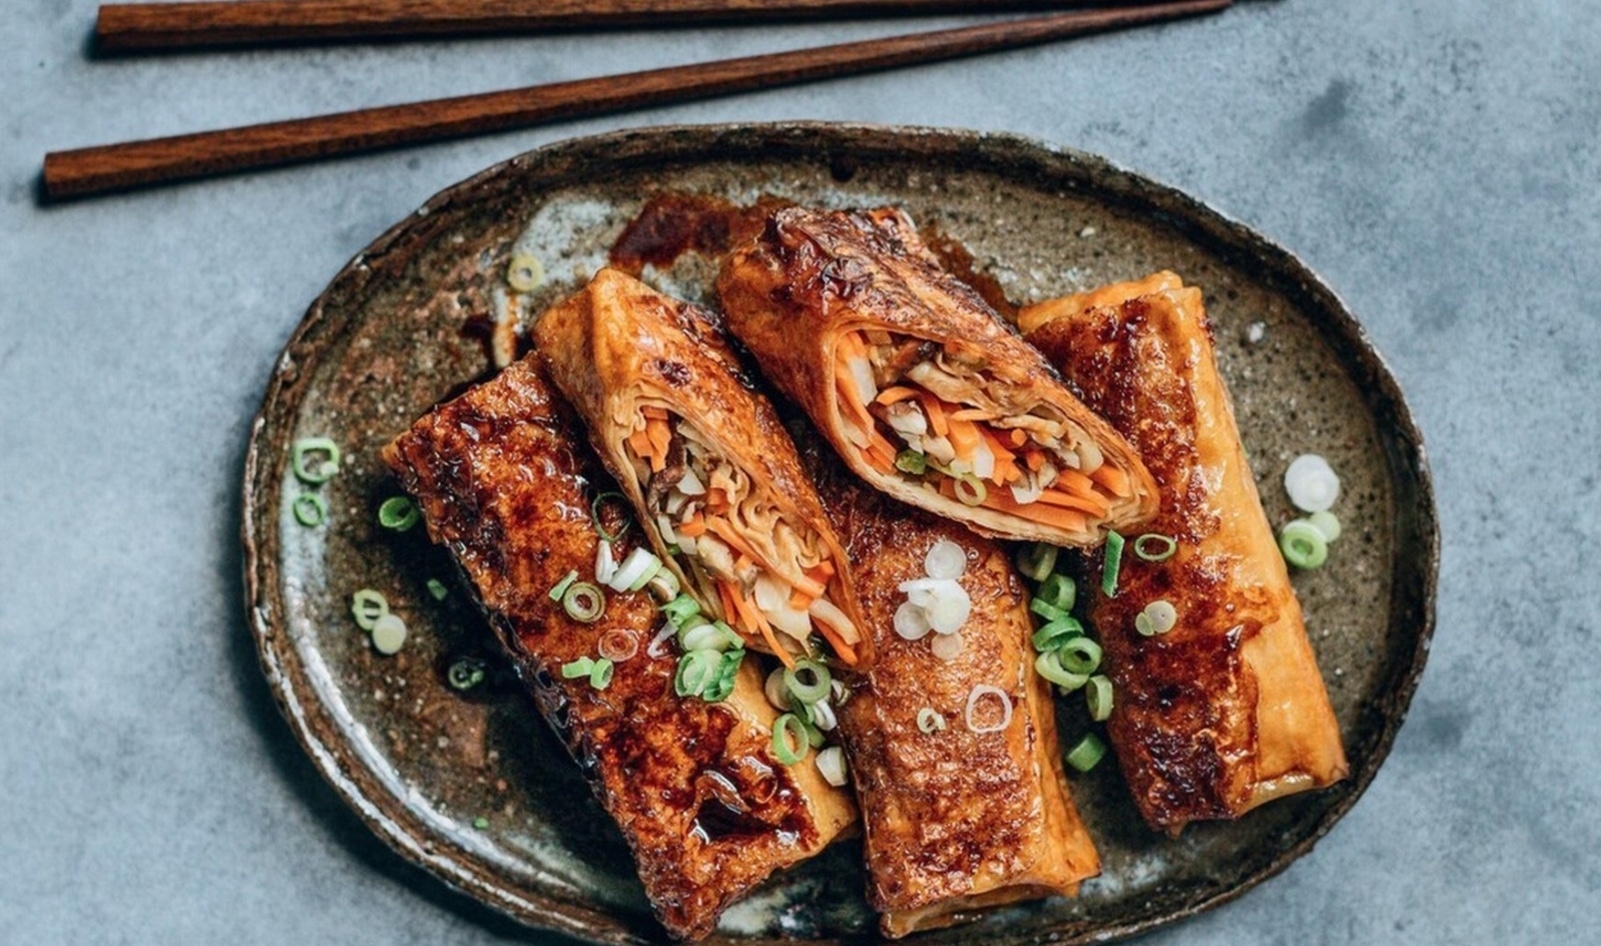 Welcome the Lunar New Year With These 15 Umami-Rich Asian Inspired Recipes